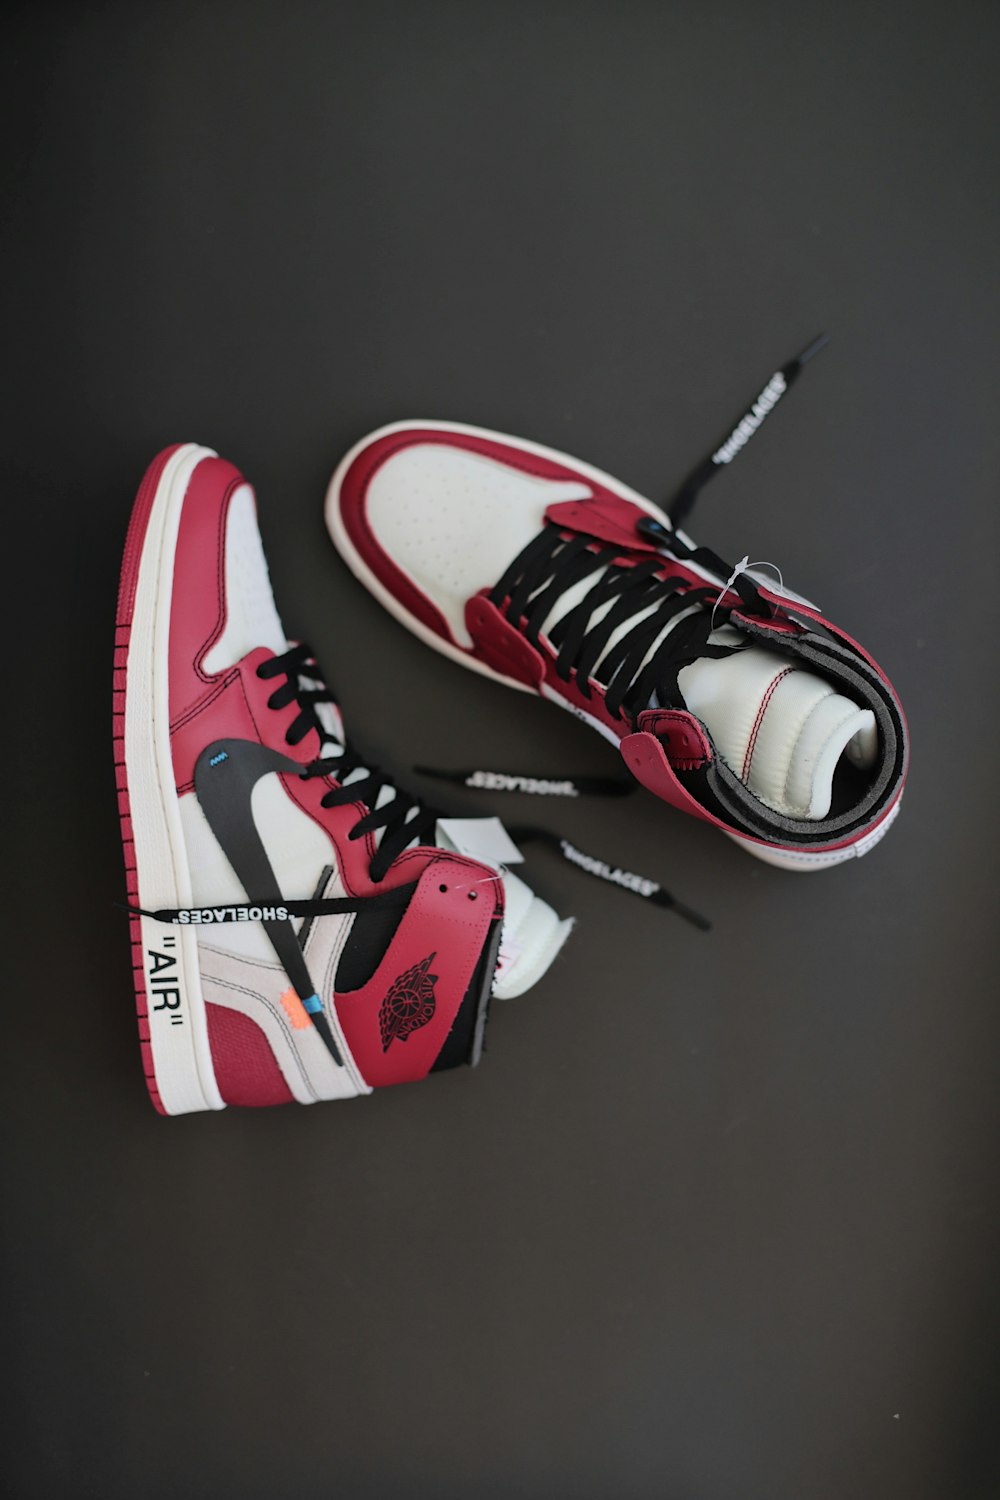 Criticar Influencia Desierto Pair of red-white-and-black nike air jordan athletic shoes photo – Free  Clothing Image on Unsplash